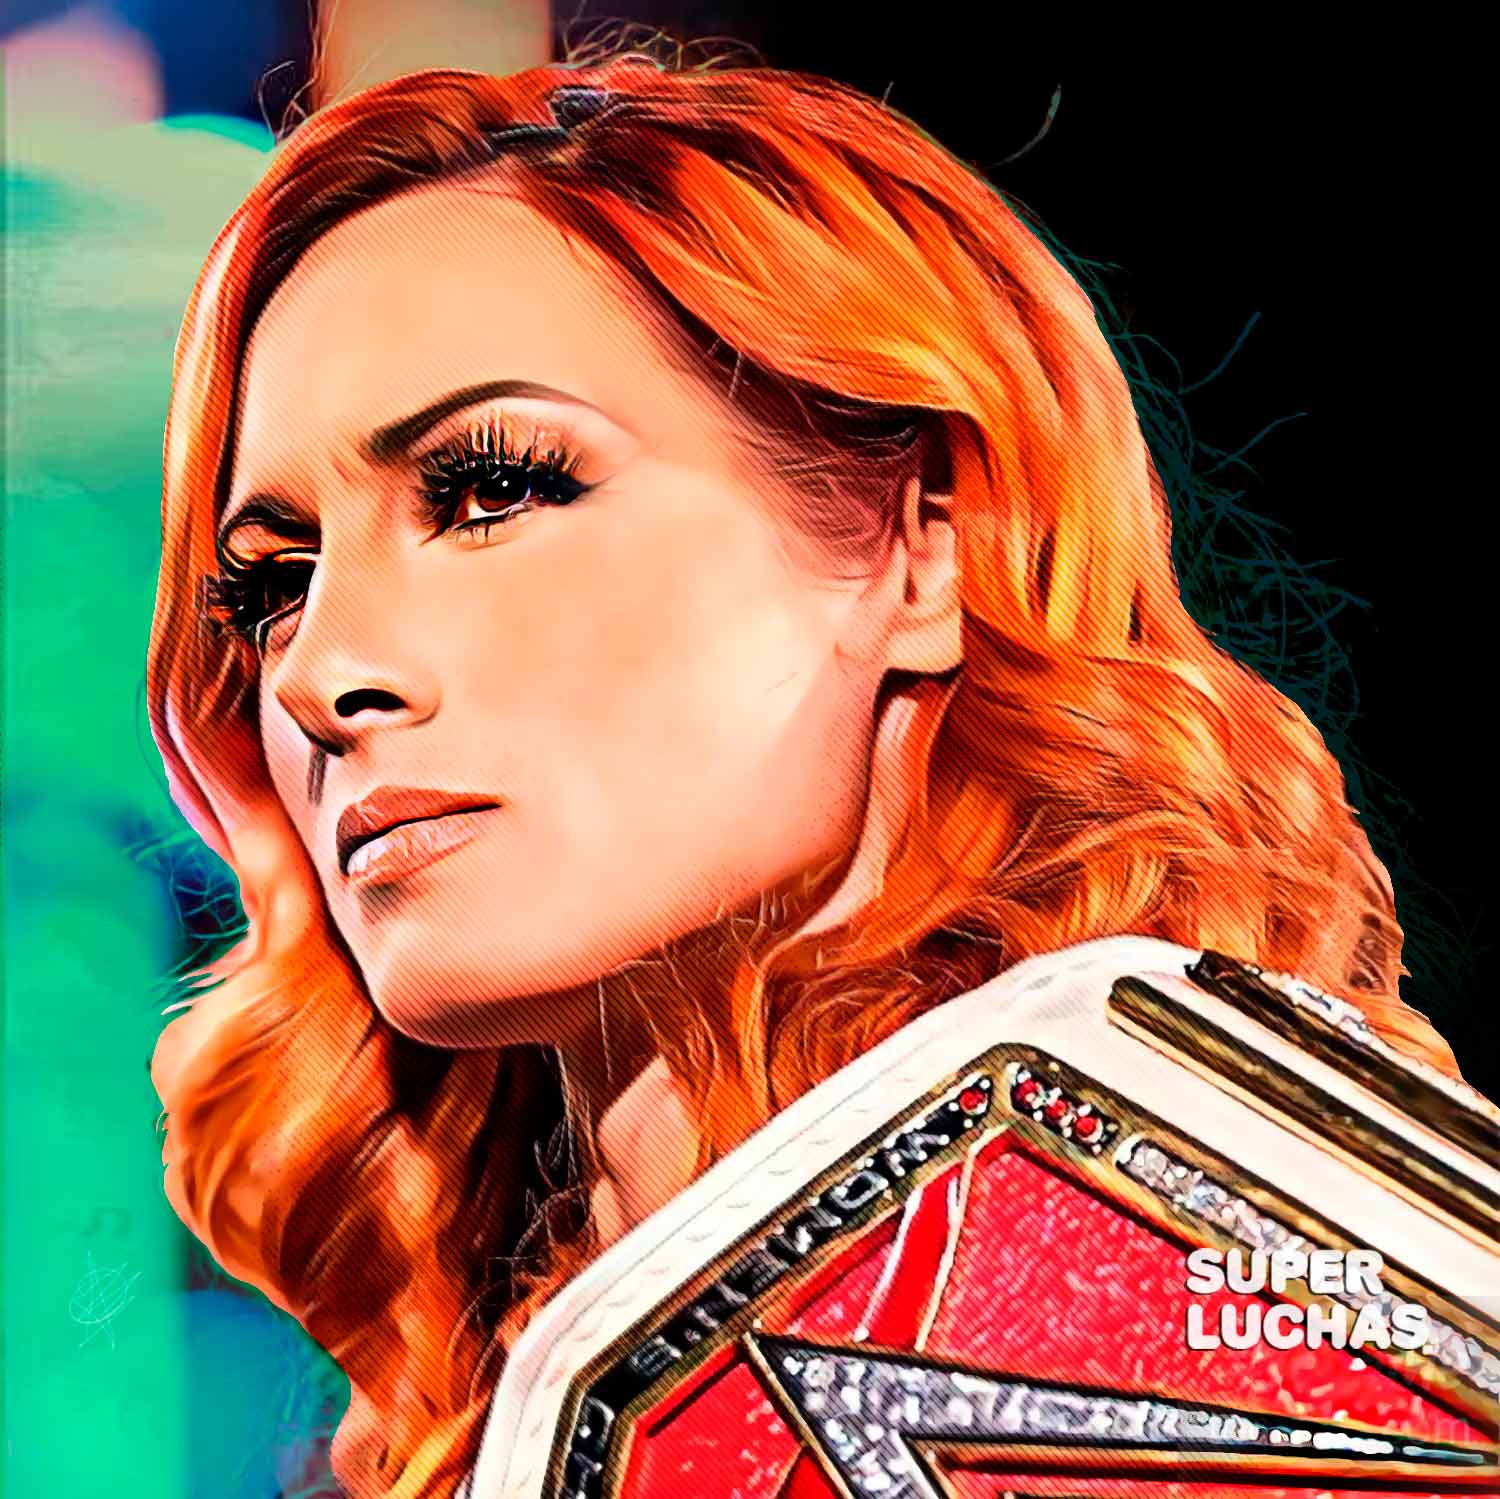 1648184763 Becky Lynch warned Trish Stratus for mentioning her Superfights